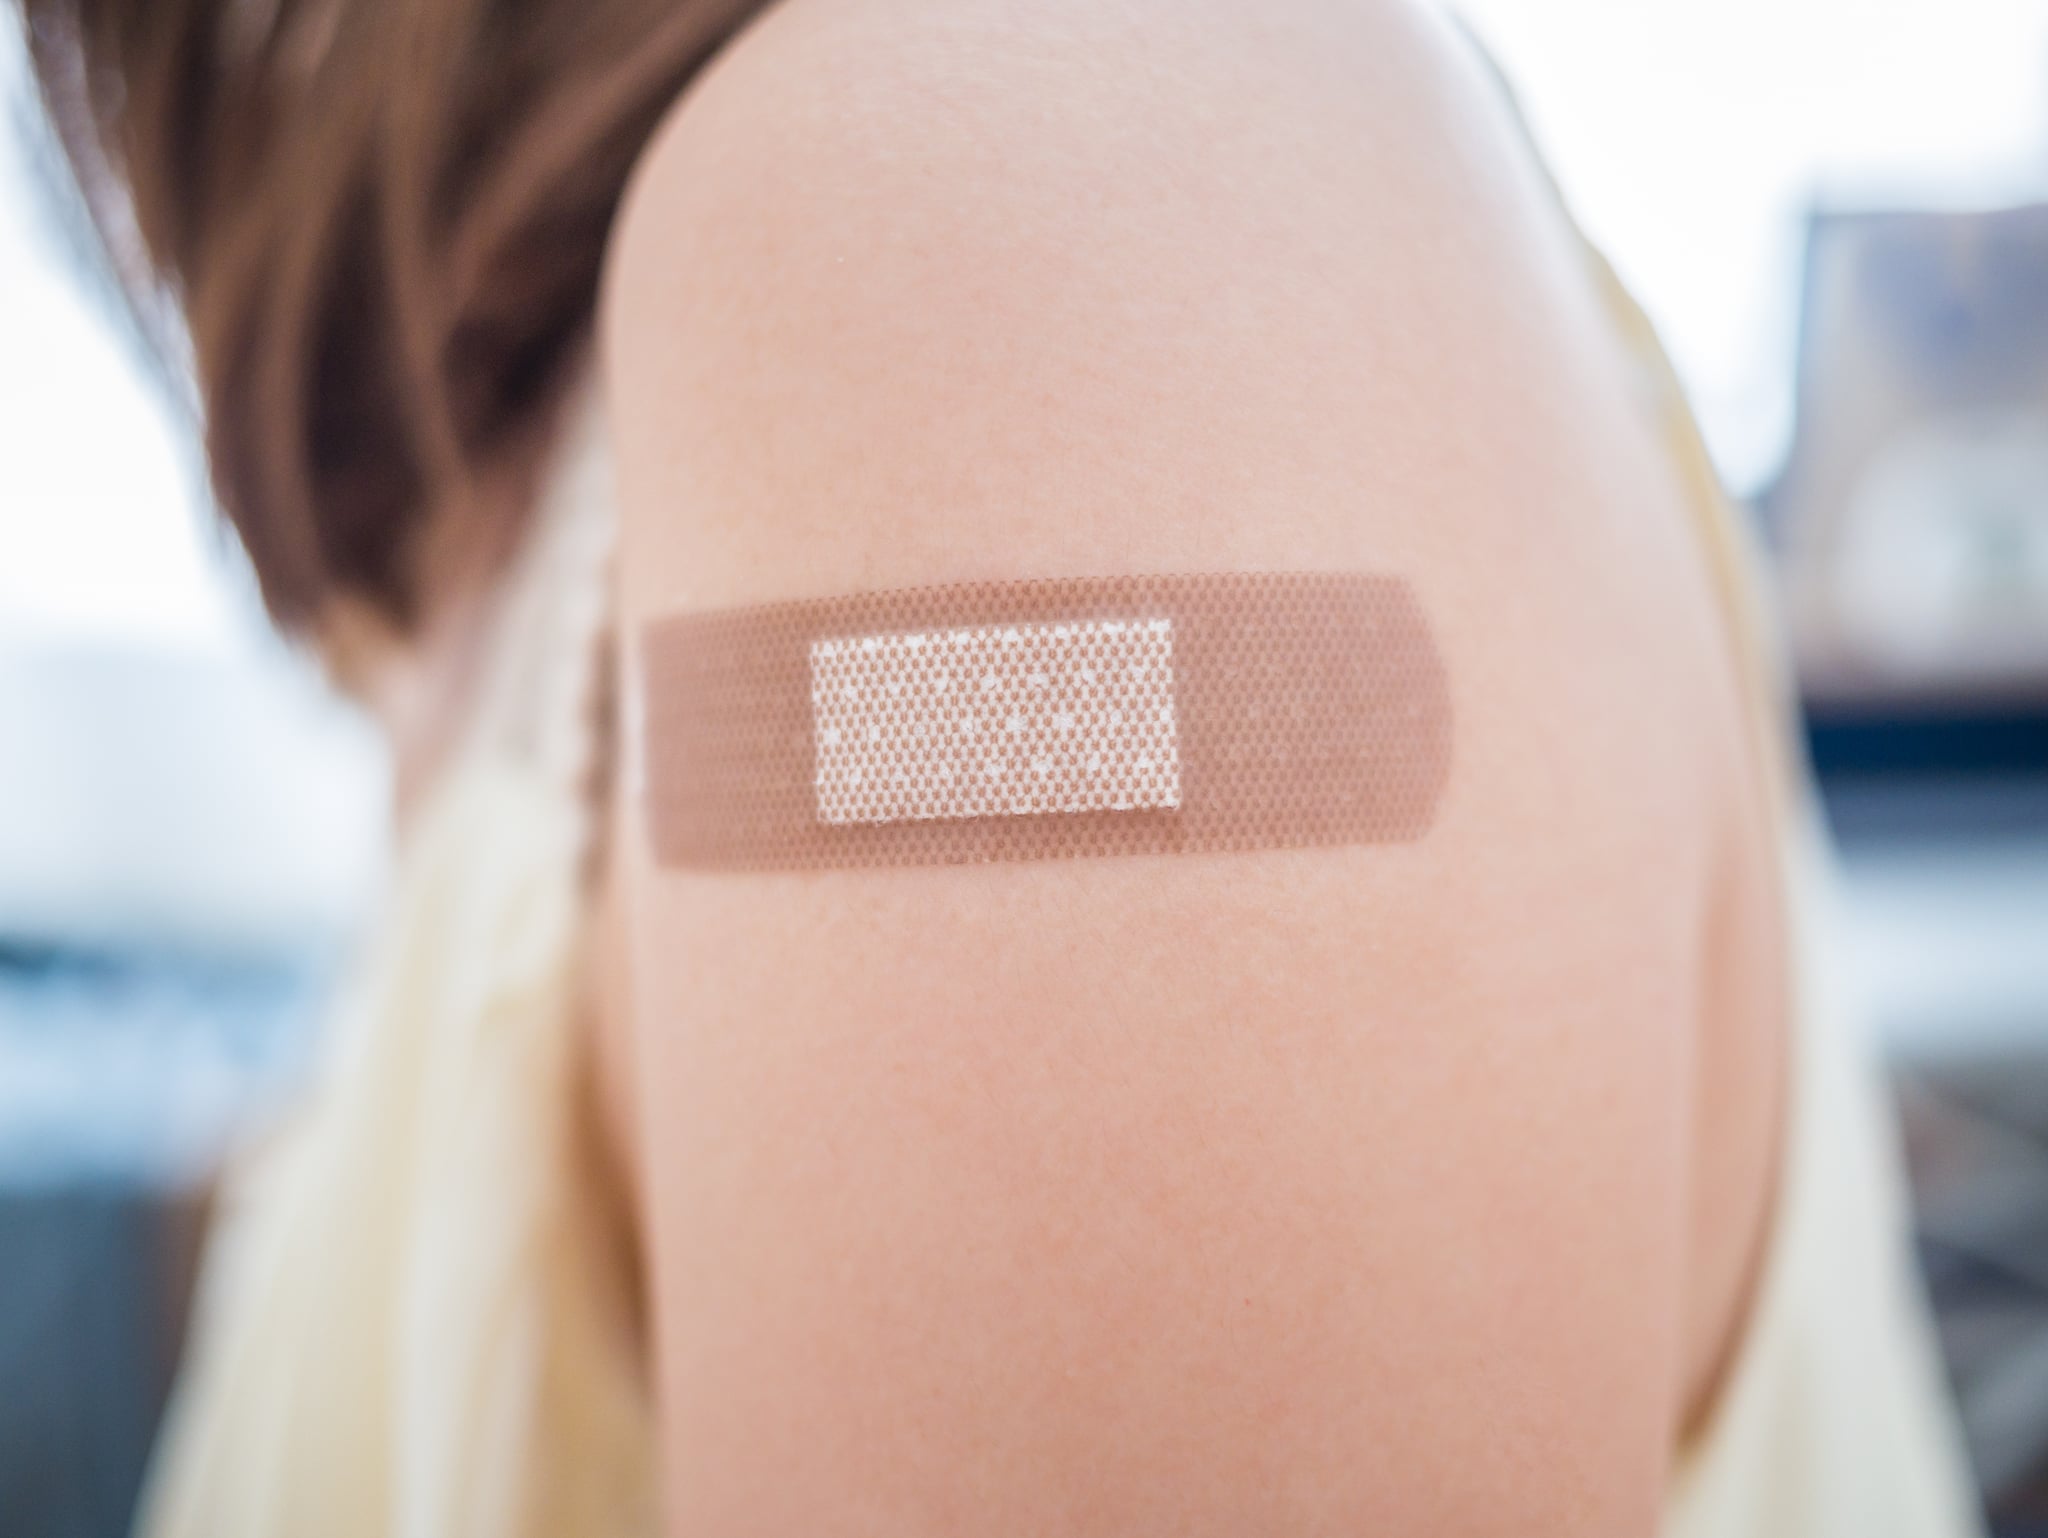 Adhesive bandage on a female arm after vaccination. 